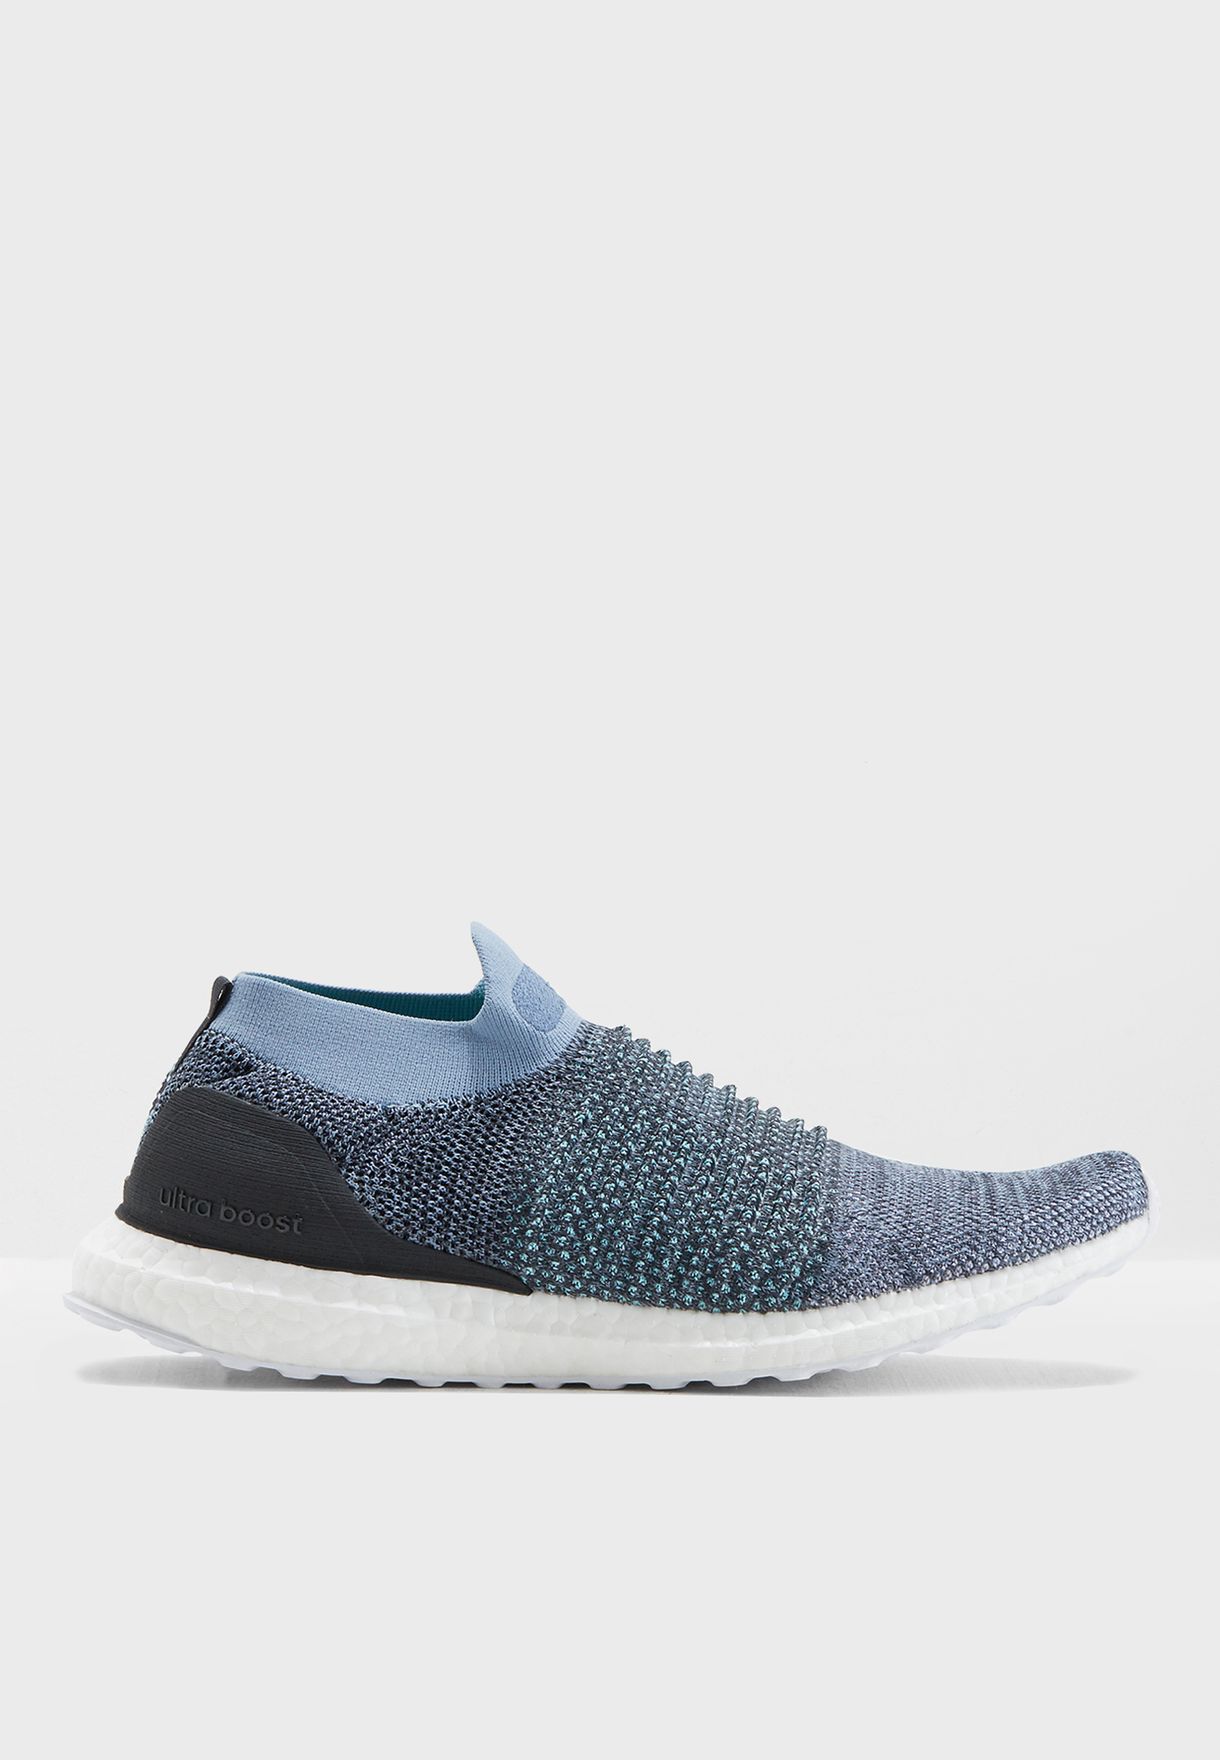 ultraboost laceless parley shoes